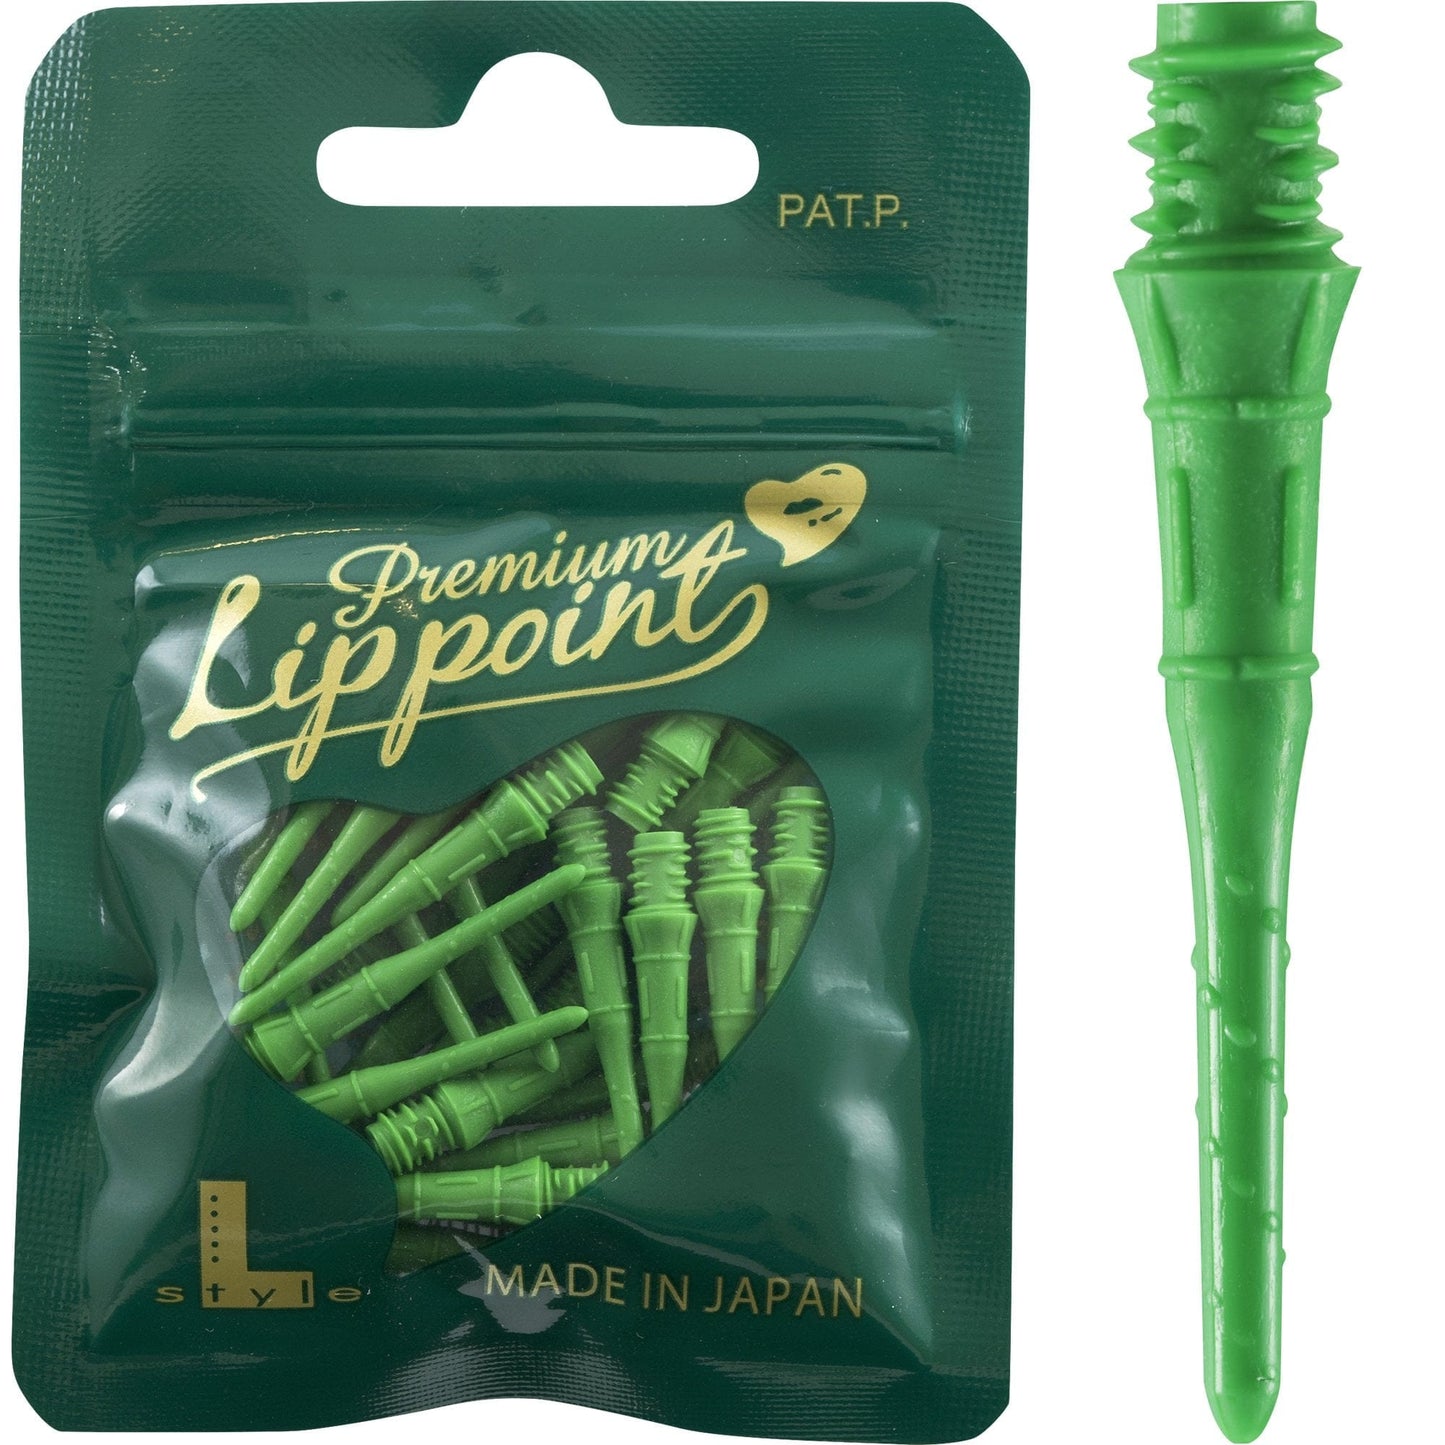 L-Style Premium LipPoint - Spare Tips - Lip Points - 2ba - Pack 30 Green